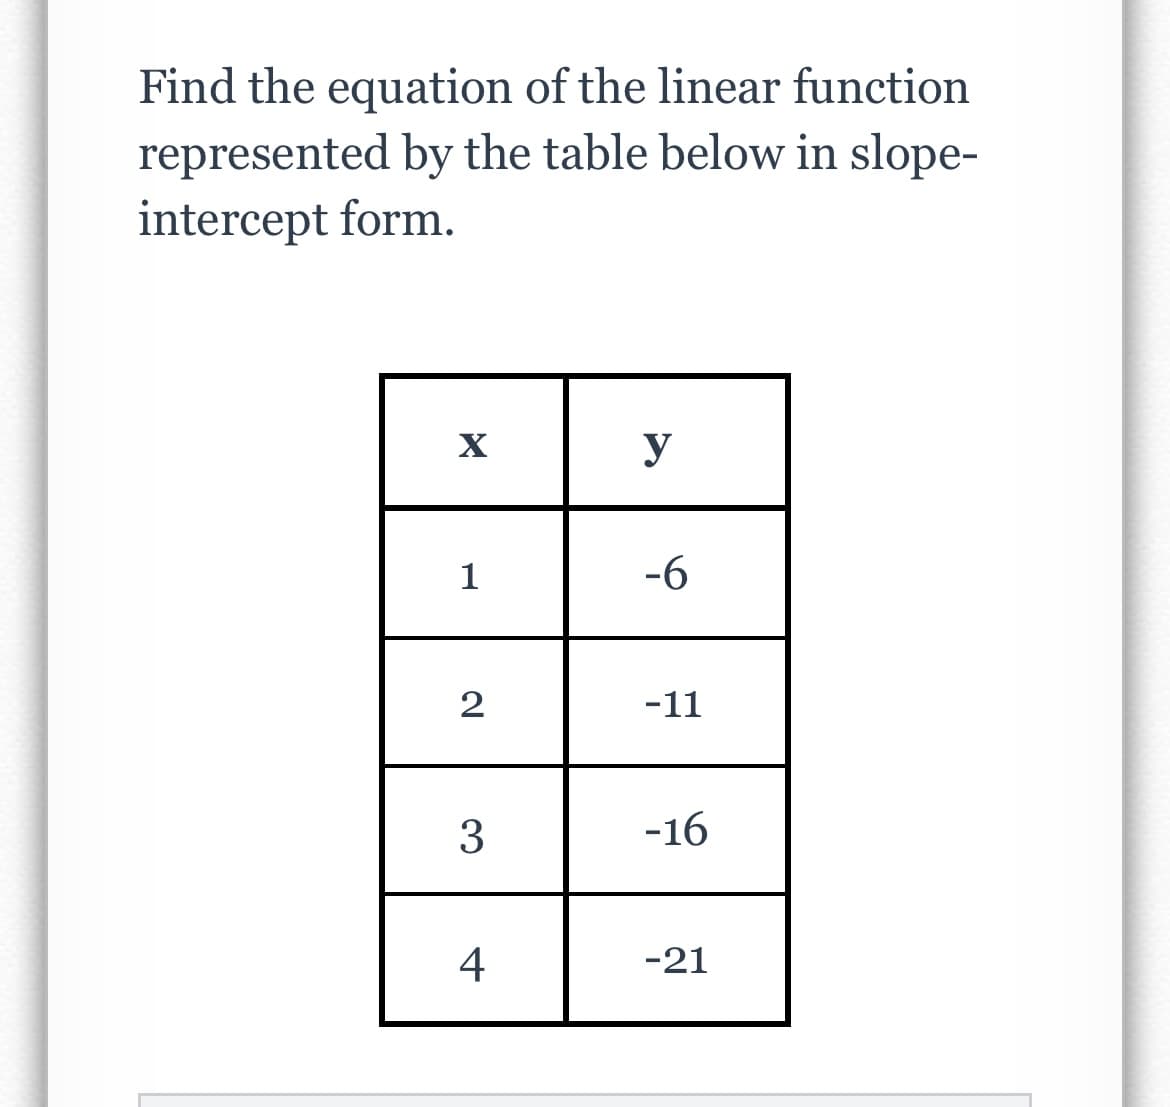 Find the equation of the linear function
represented by the table below in slope-
intercept form.
X
1
2
3
4
y
-6
-11
-16
-21